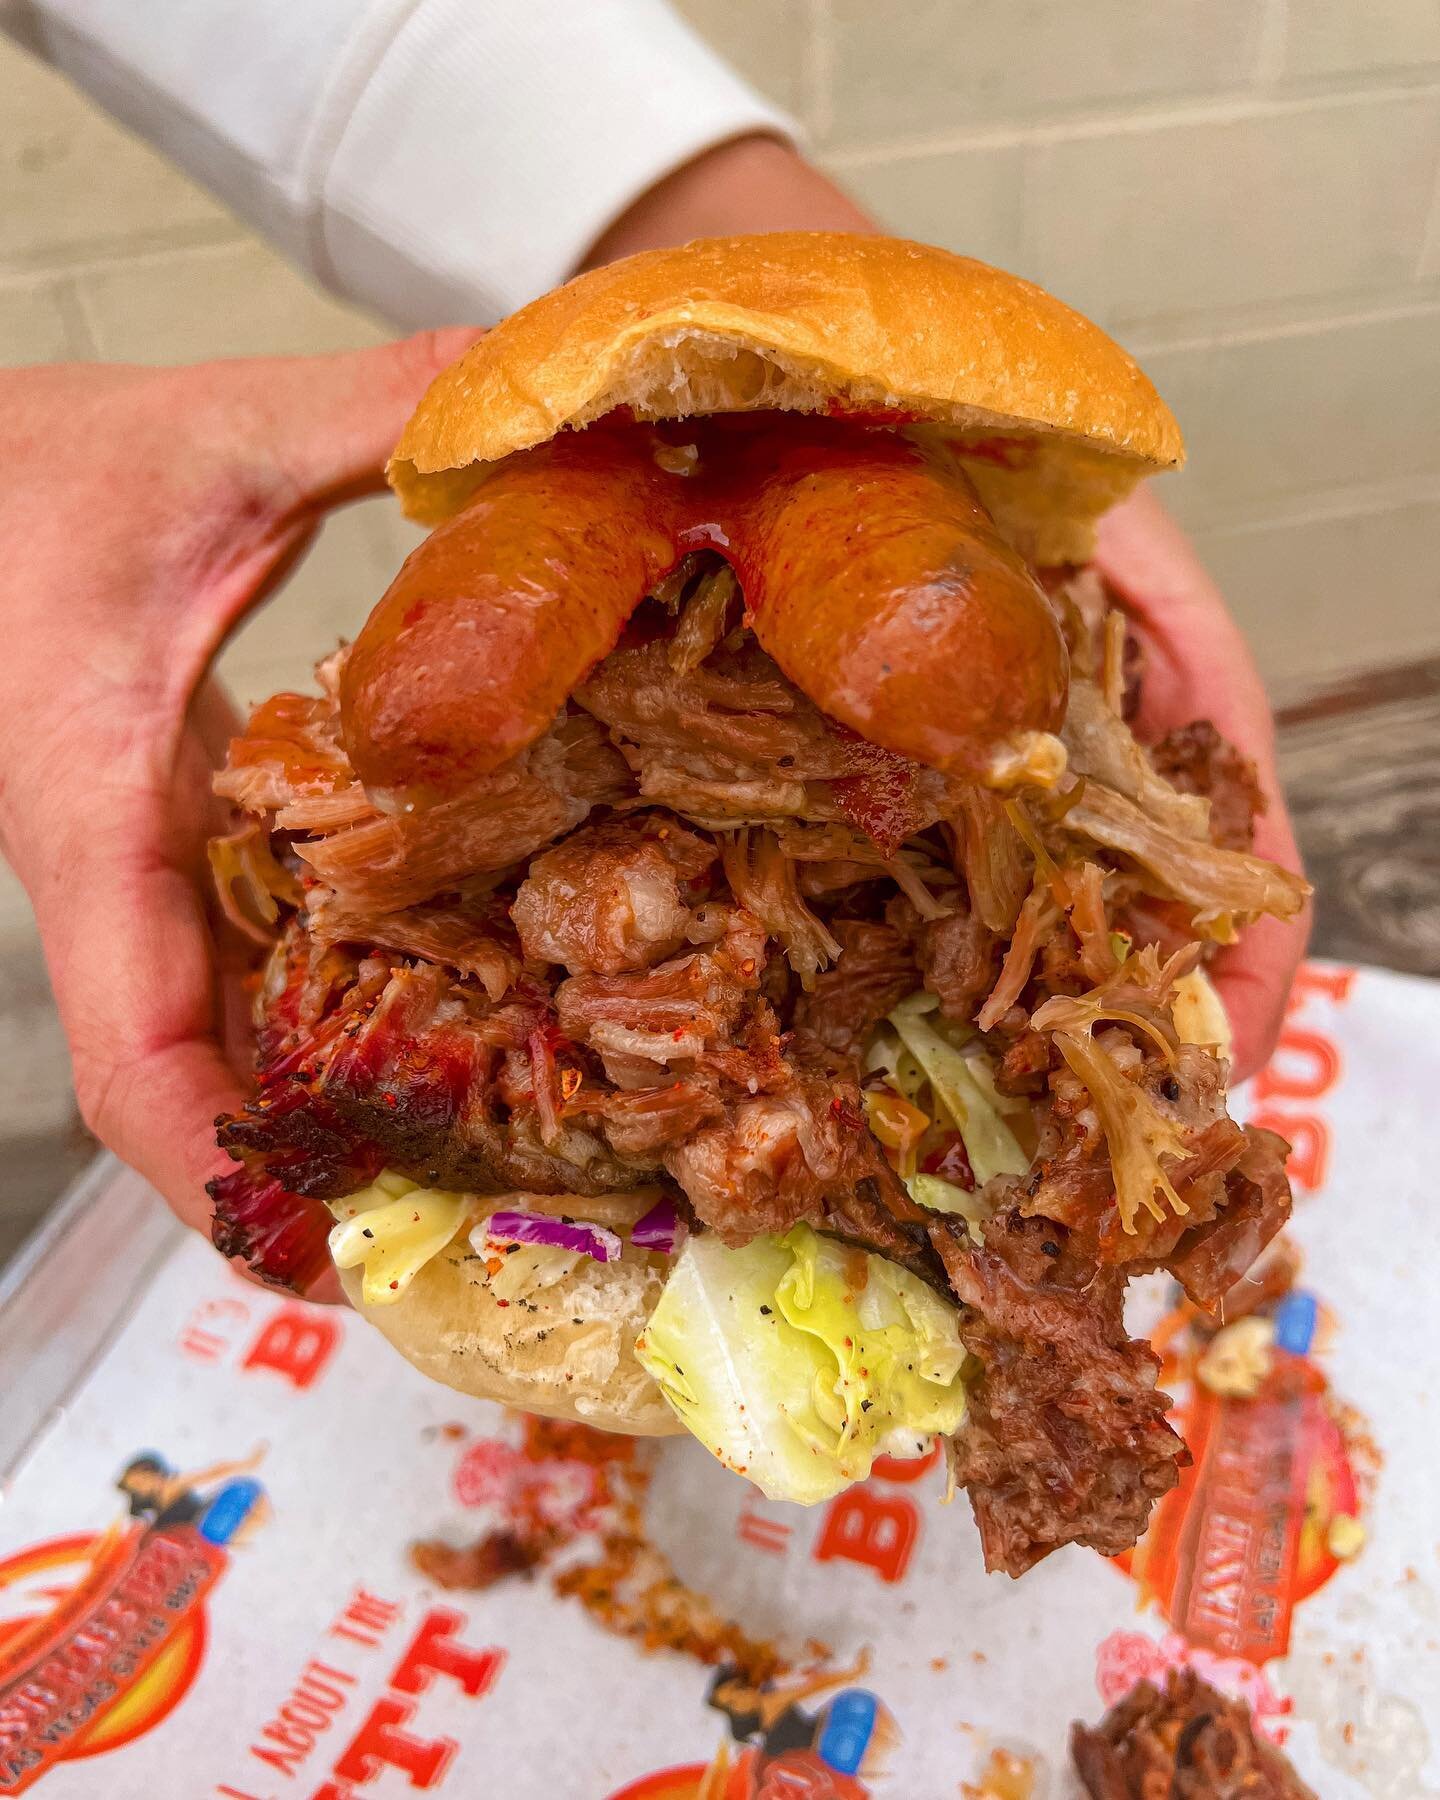 We love a FULL HOUSE 🙌🏼‼️ Three meats between two buns 🤯

📸 HOUSEHOLD OF THREE
Pork, Brisket &amp; Hot Links in Between Two Buns

🔥Jessie Rae's BBQ🔥
‼️TWO LOCATIONS‼️

📍Las Vegas - 5611 S. Valley View Blvd
📞 (702) 541-5546
🕖 Sun-Thurs | 11am